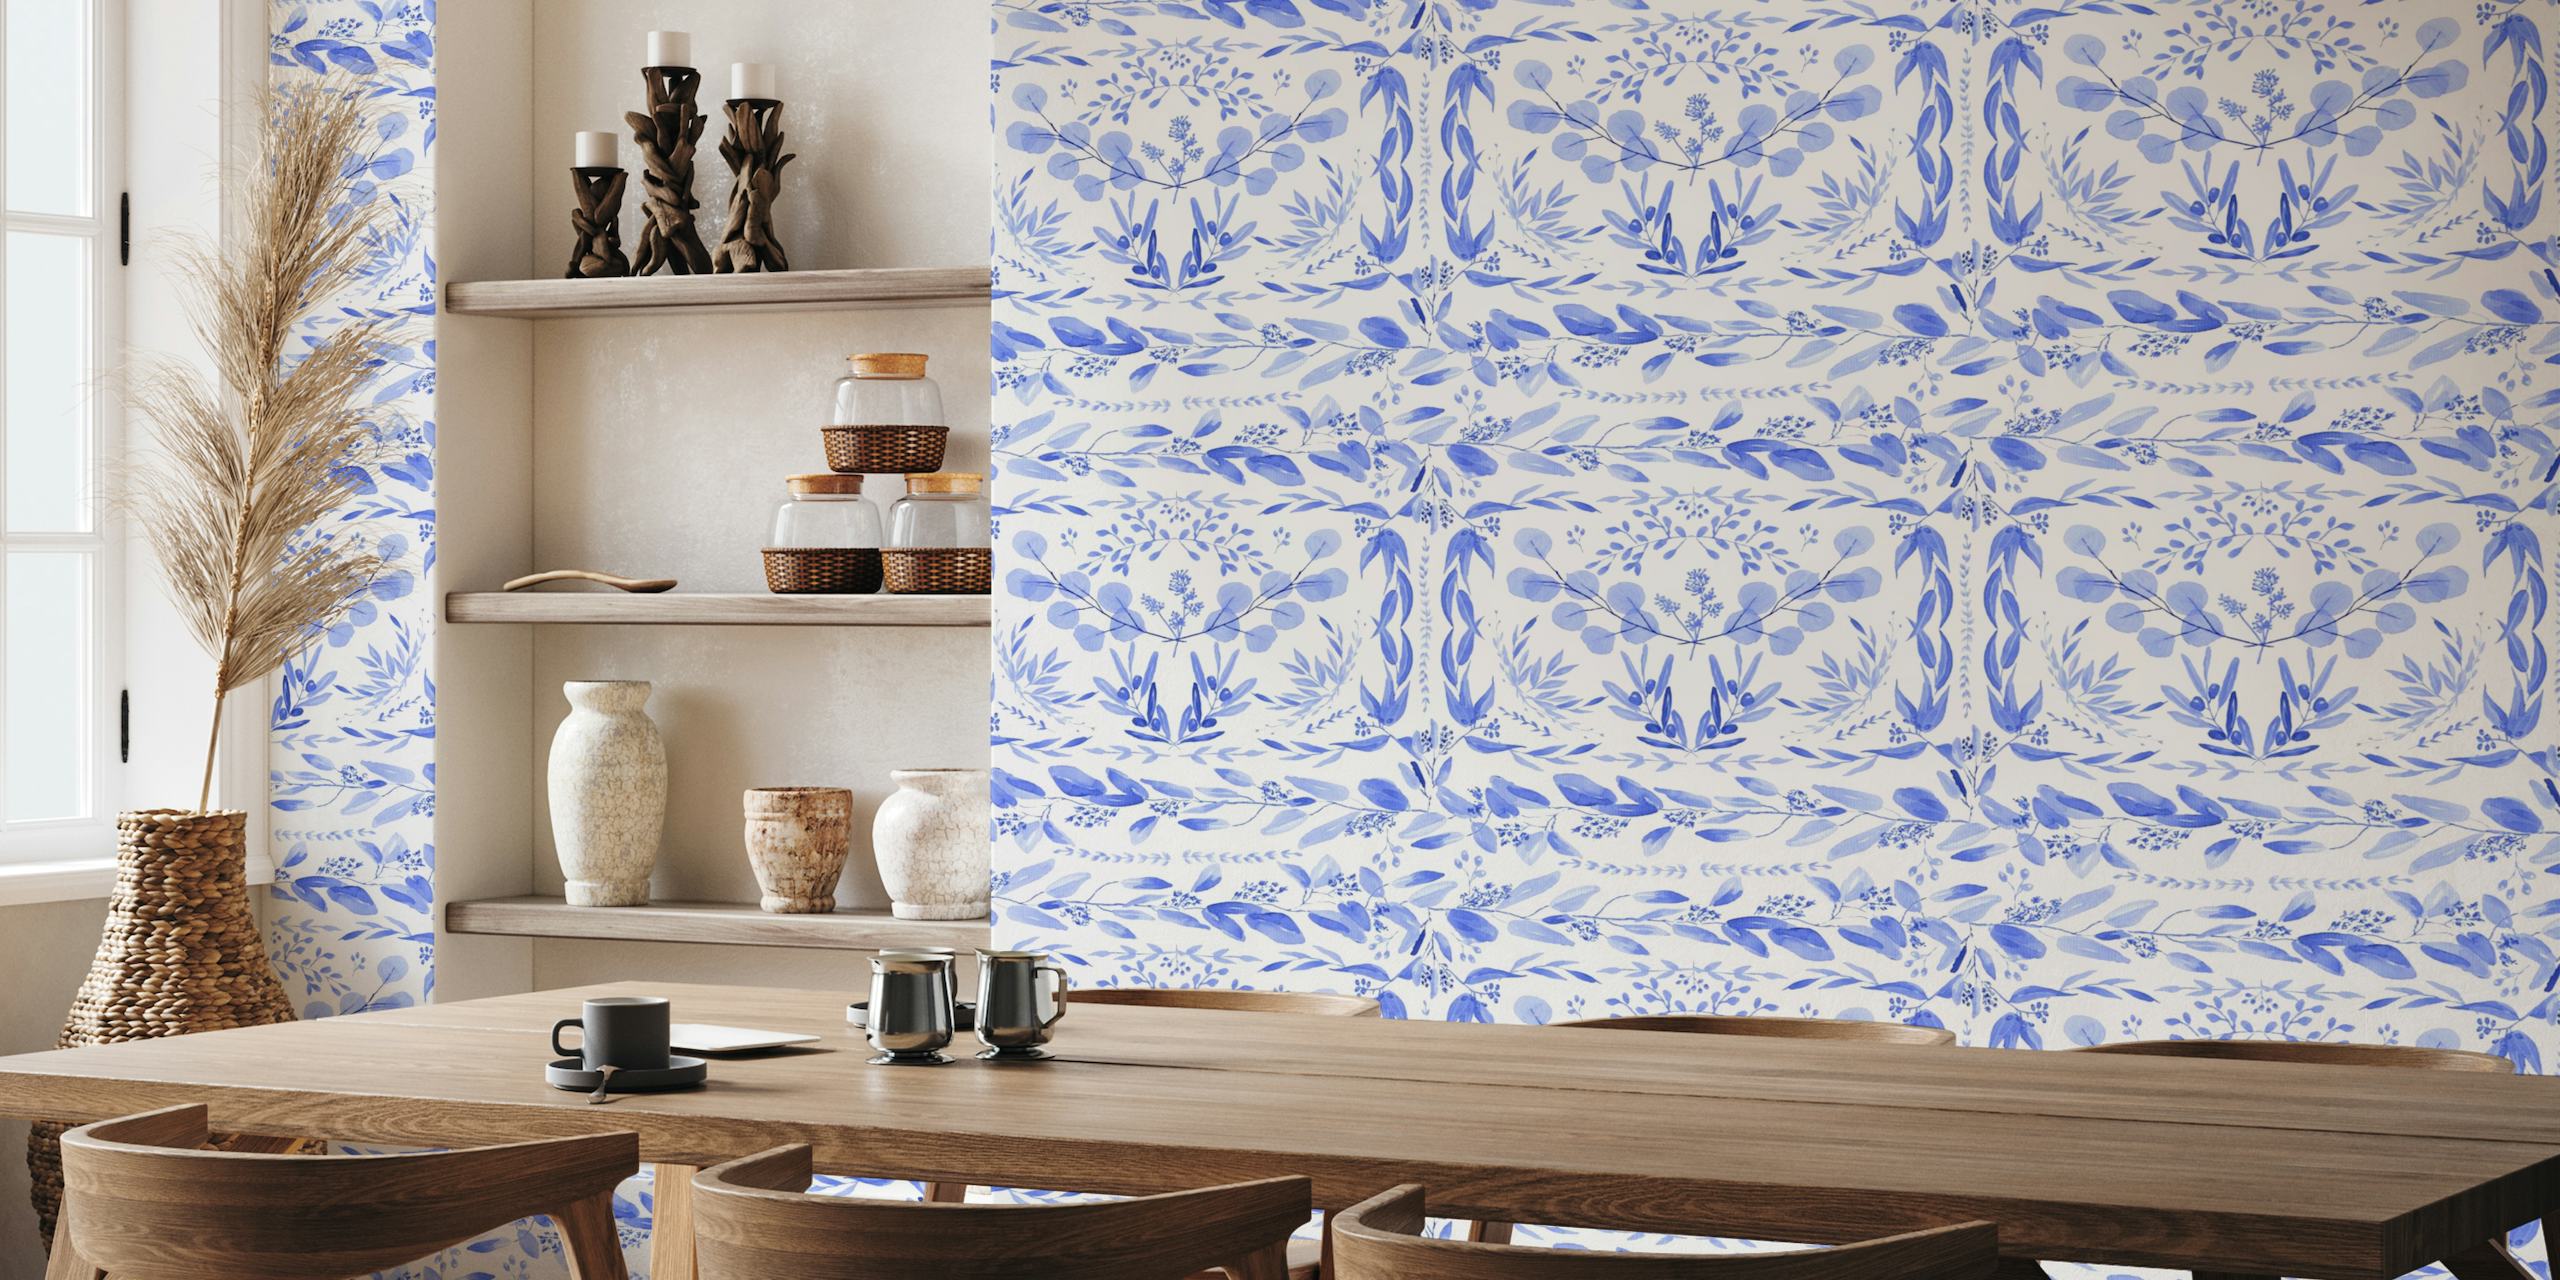 Blue and white Mediterranean floral pattern wall mural.